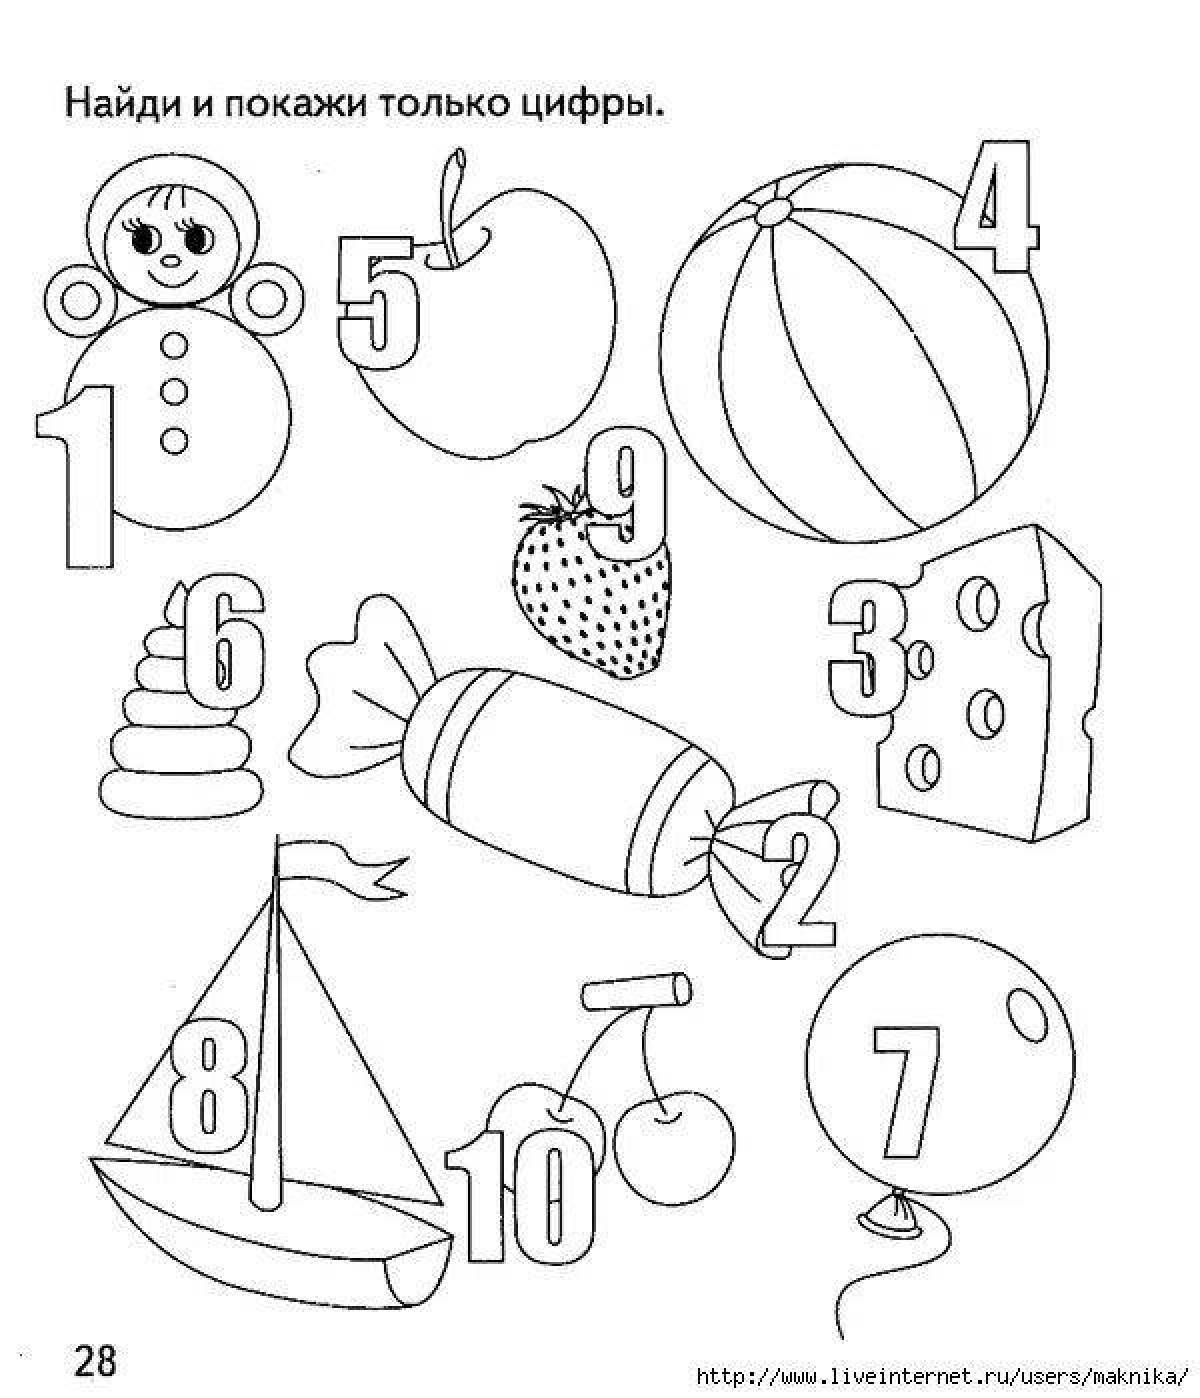 Developing coloring book we train and develop 4-5 years